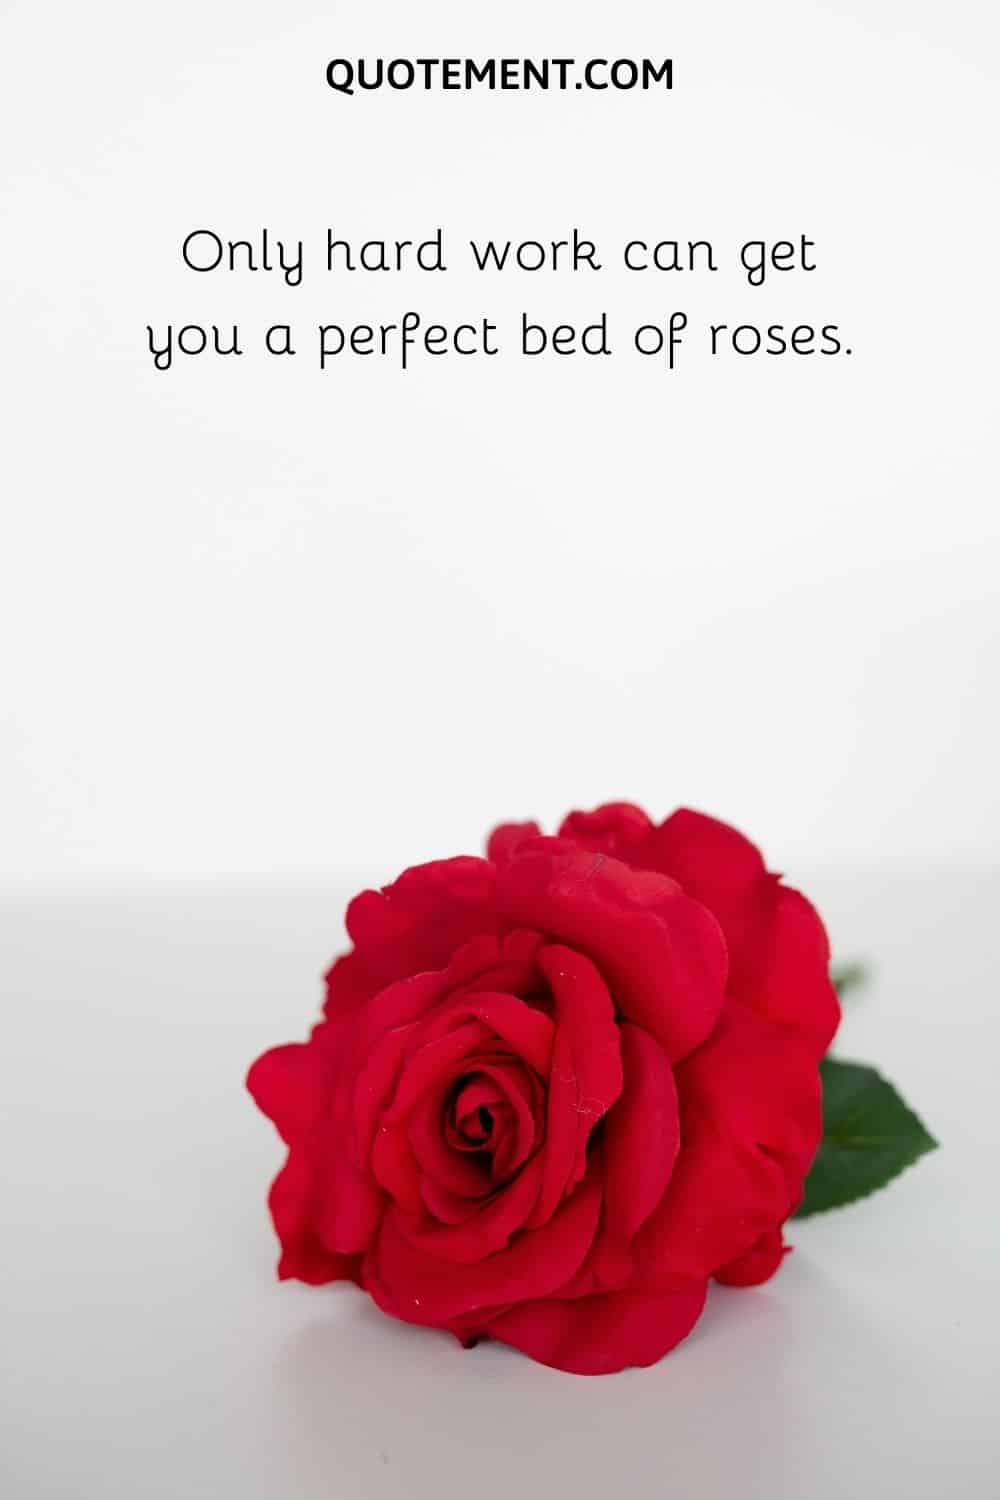 Only hard work can get you a perfect bed of roses.